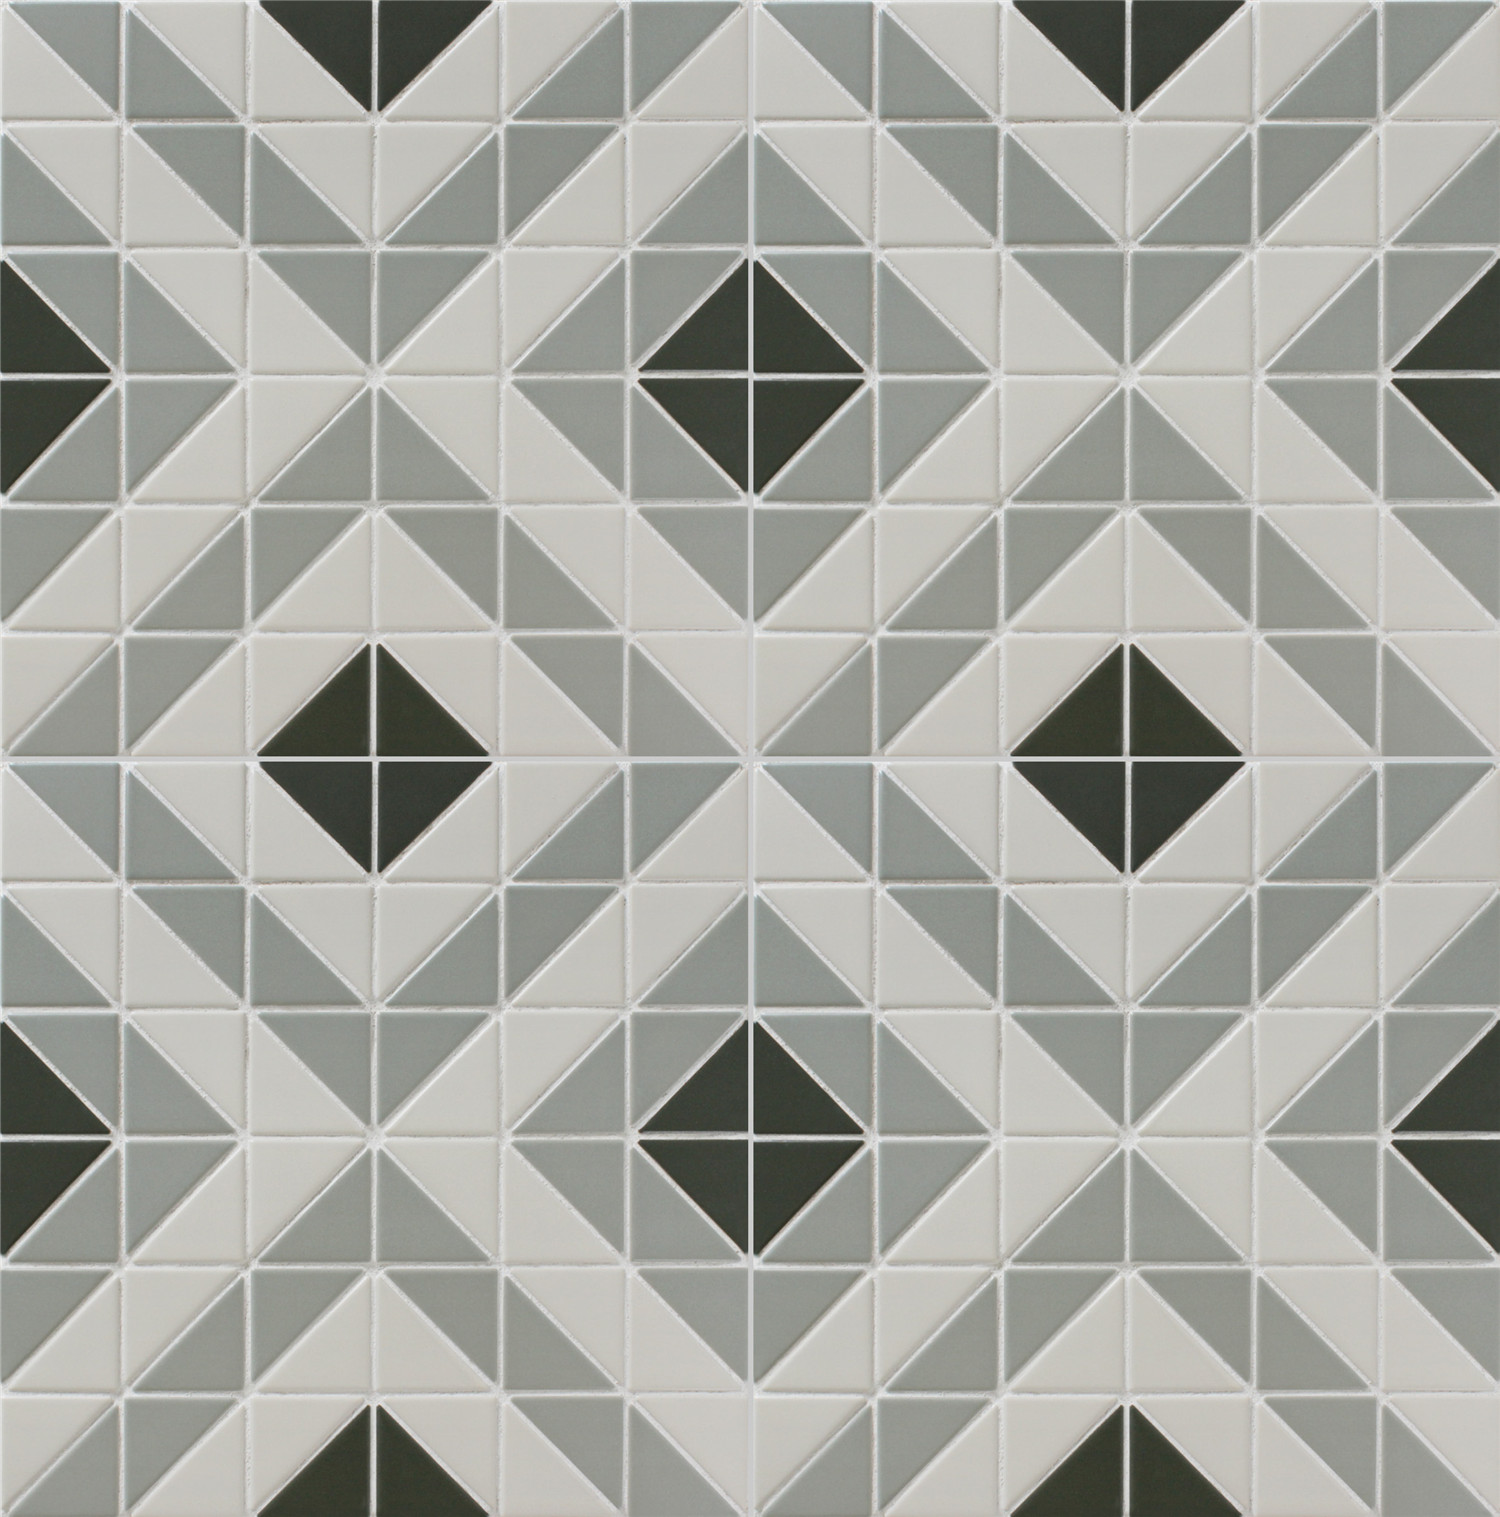 Unique Geometric Tile Patterns for Small Space